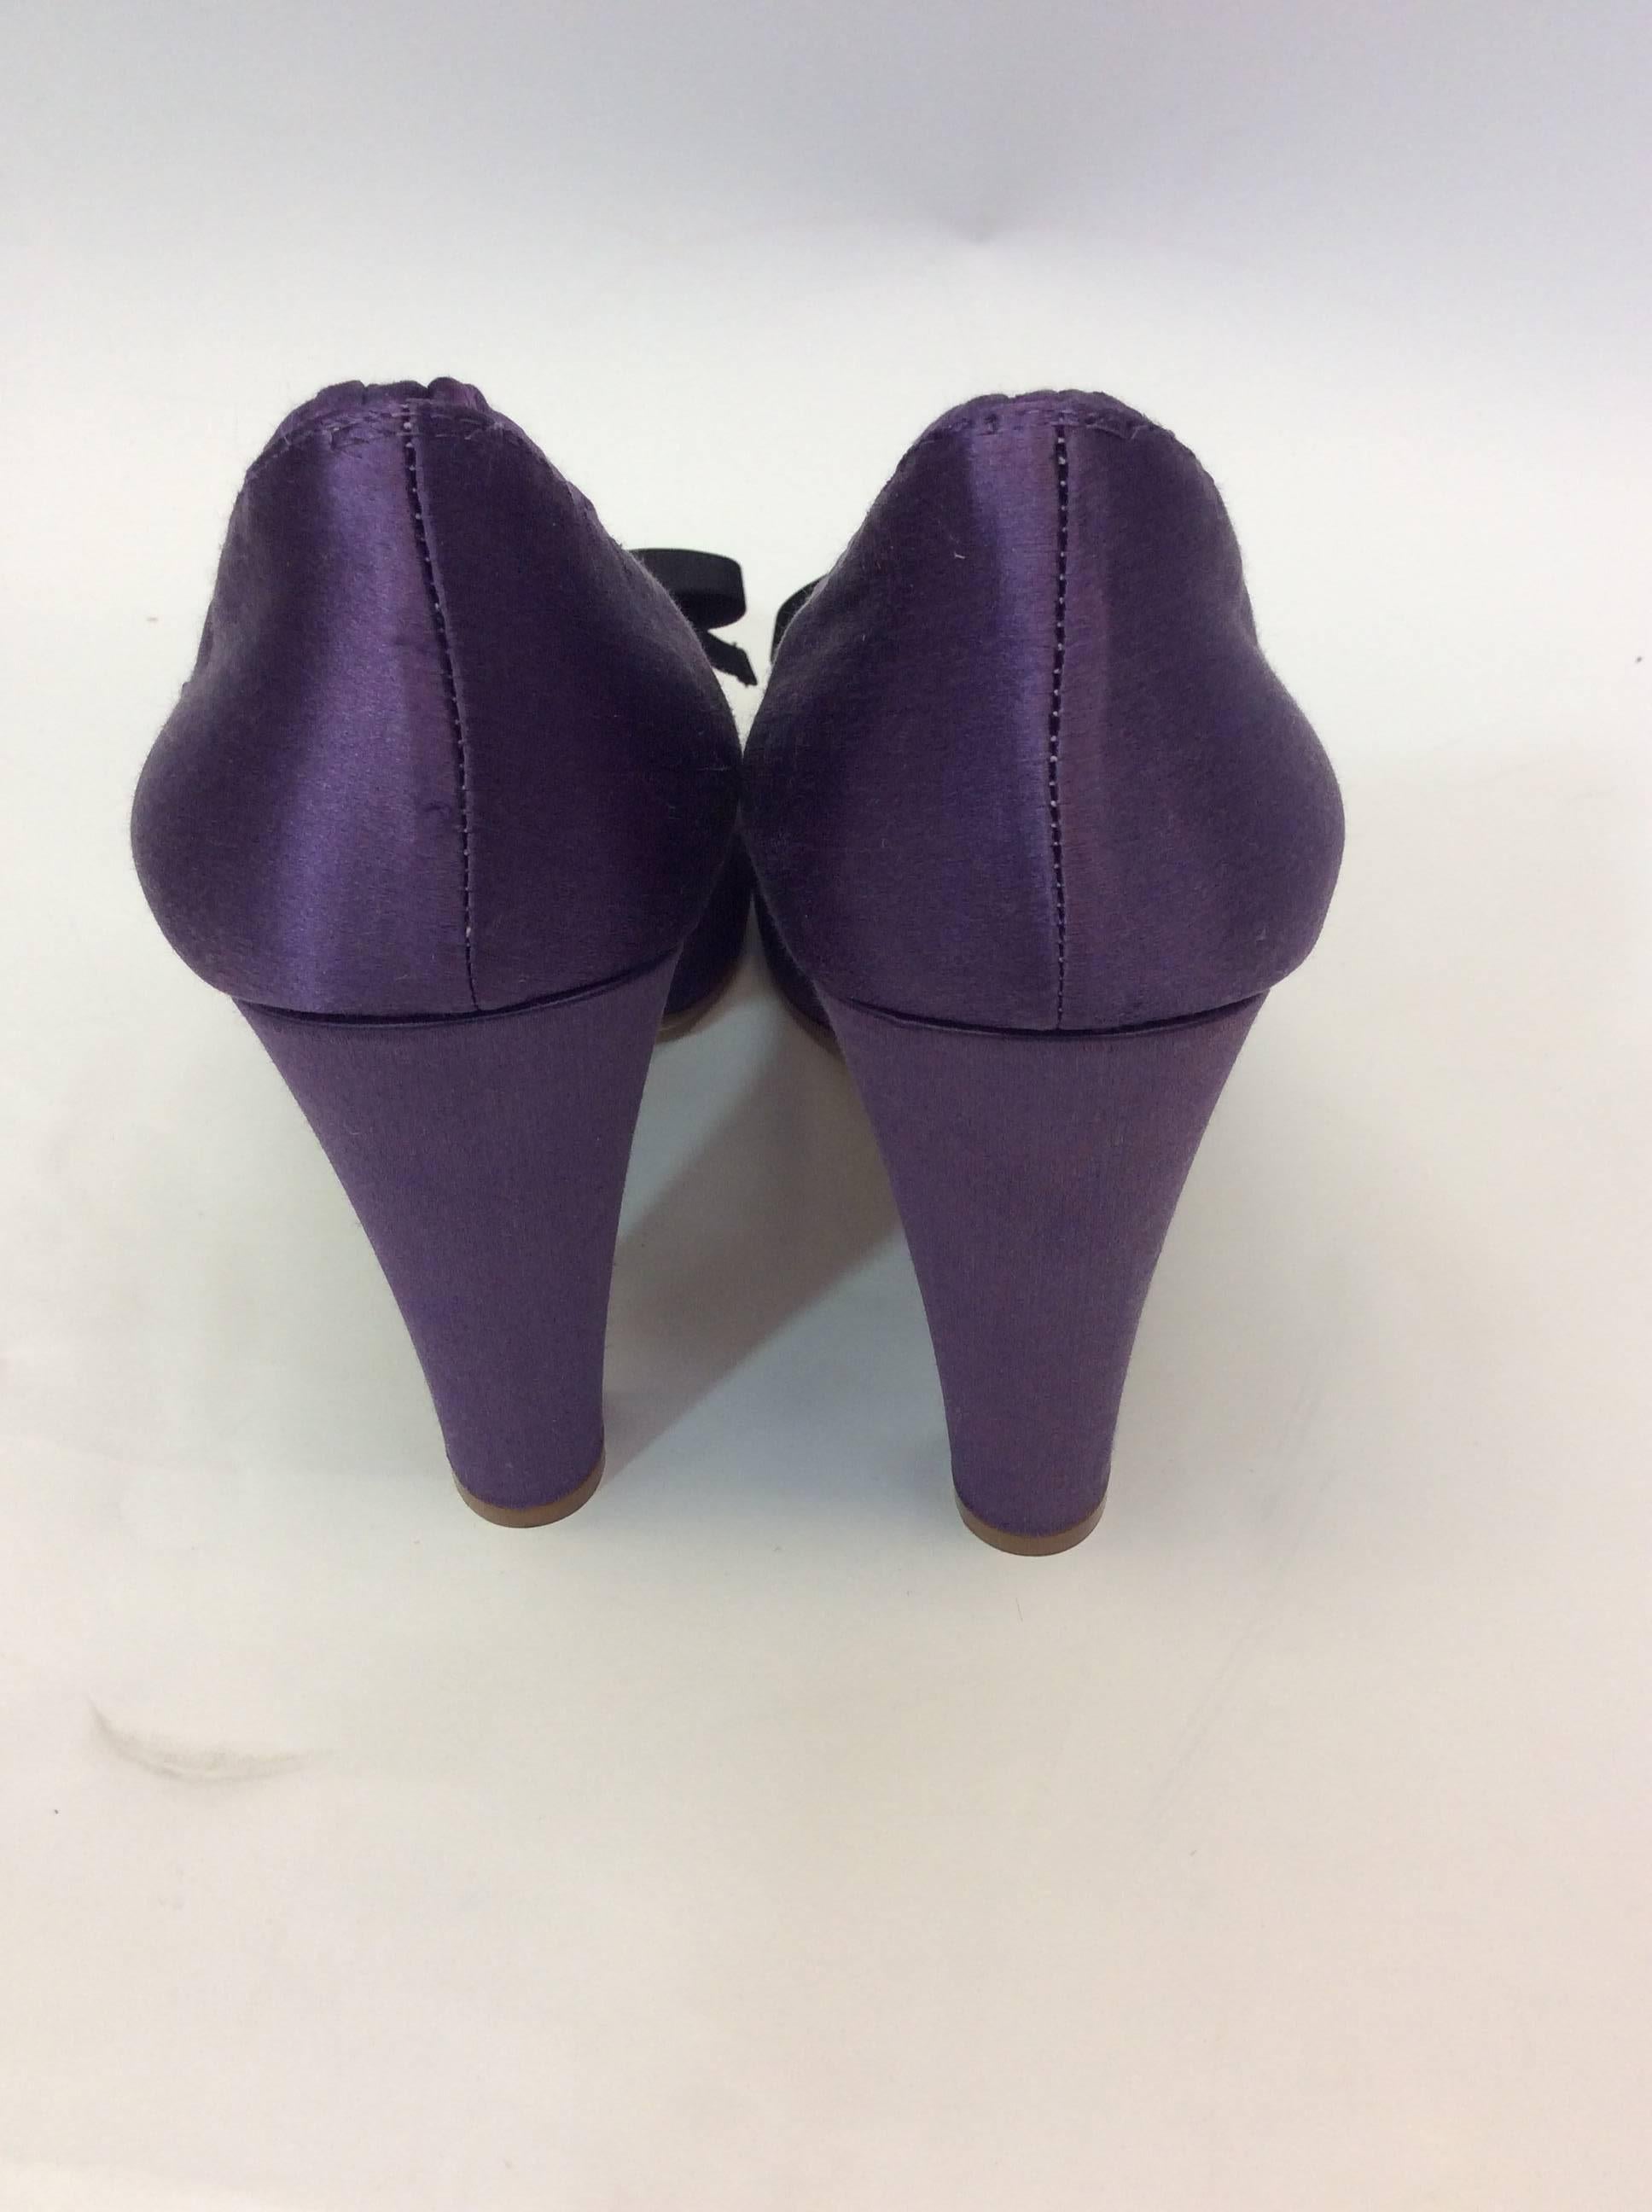 Marc by Marc Jacobs Purple Satin Pumps with Black Bow Detail For Sale 1